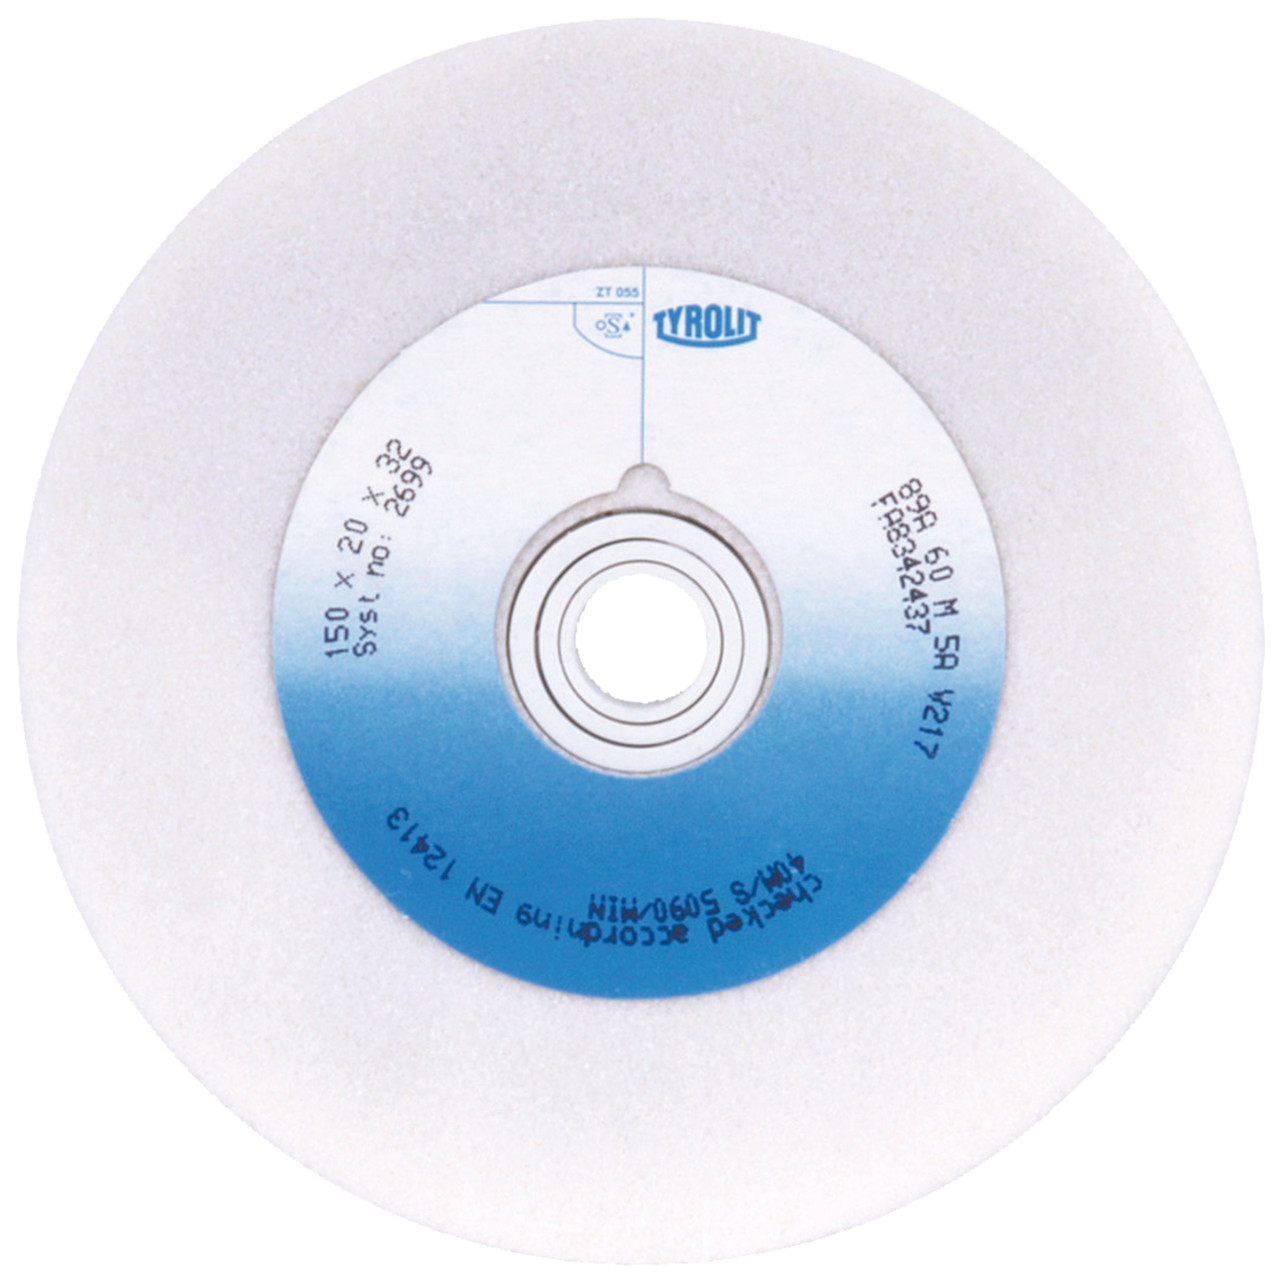 Tyrolit Conventional ceramic grinding discs DxDxH 250x32x32 For high-alloy steels and HSS, shape: 1, Art. 3545